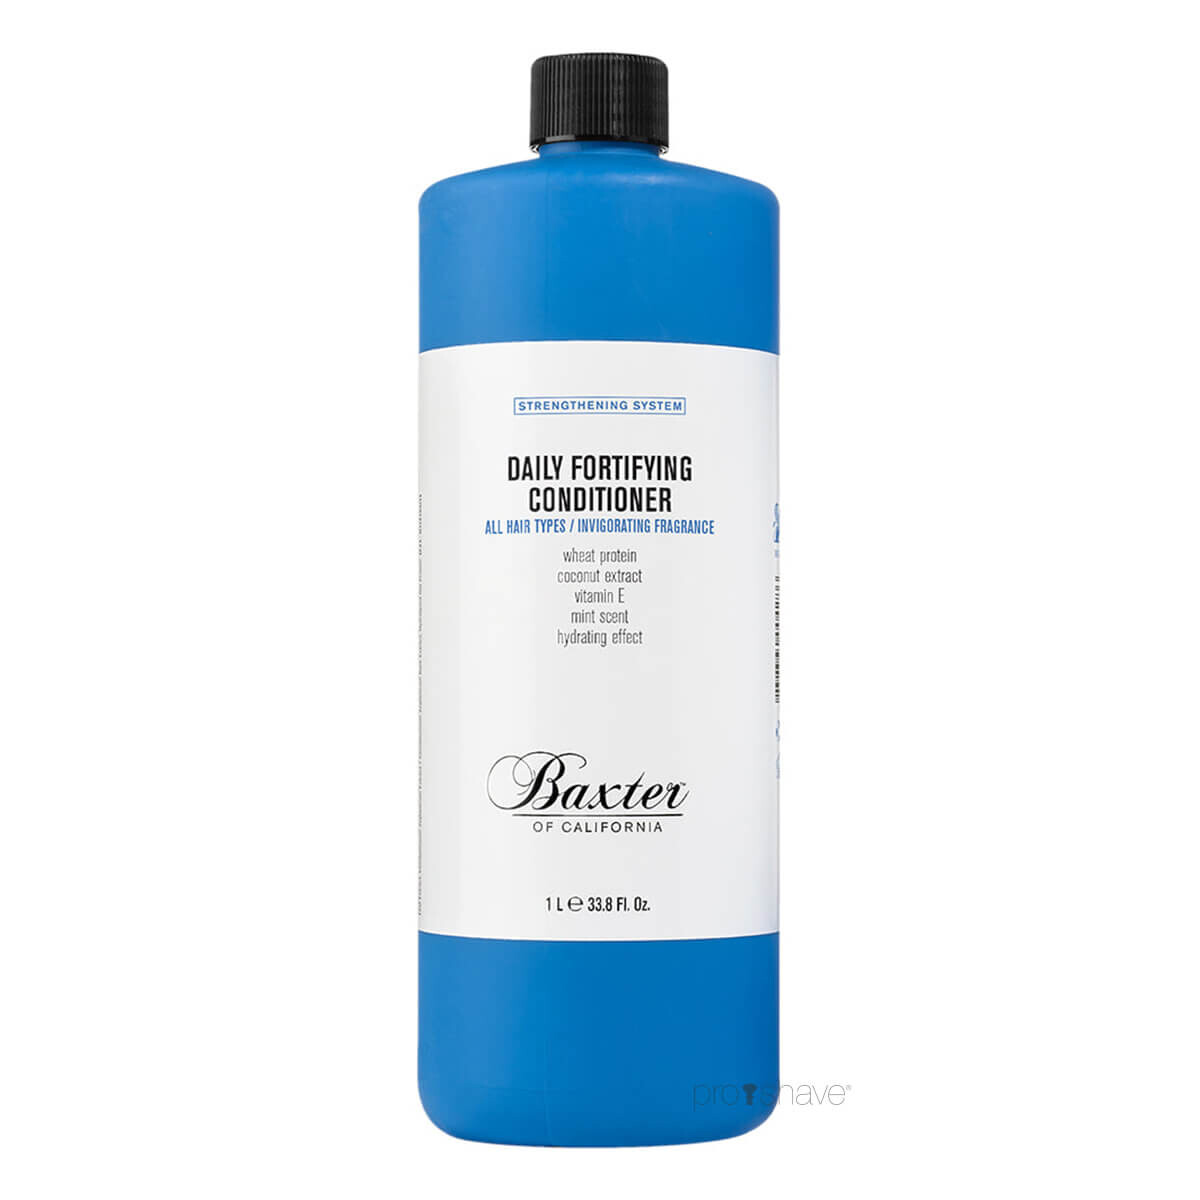 Baxter of California Daily Fortifying Conditioner, 1 L.